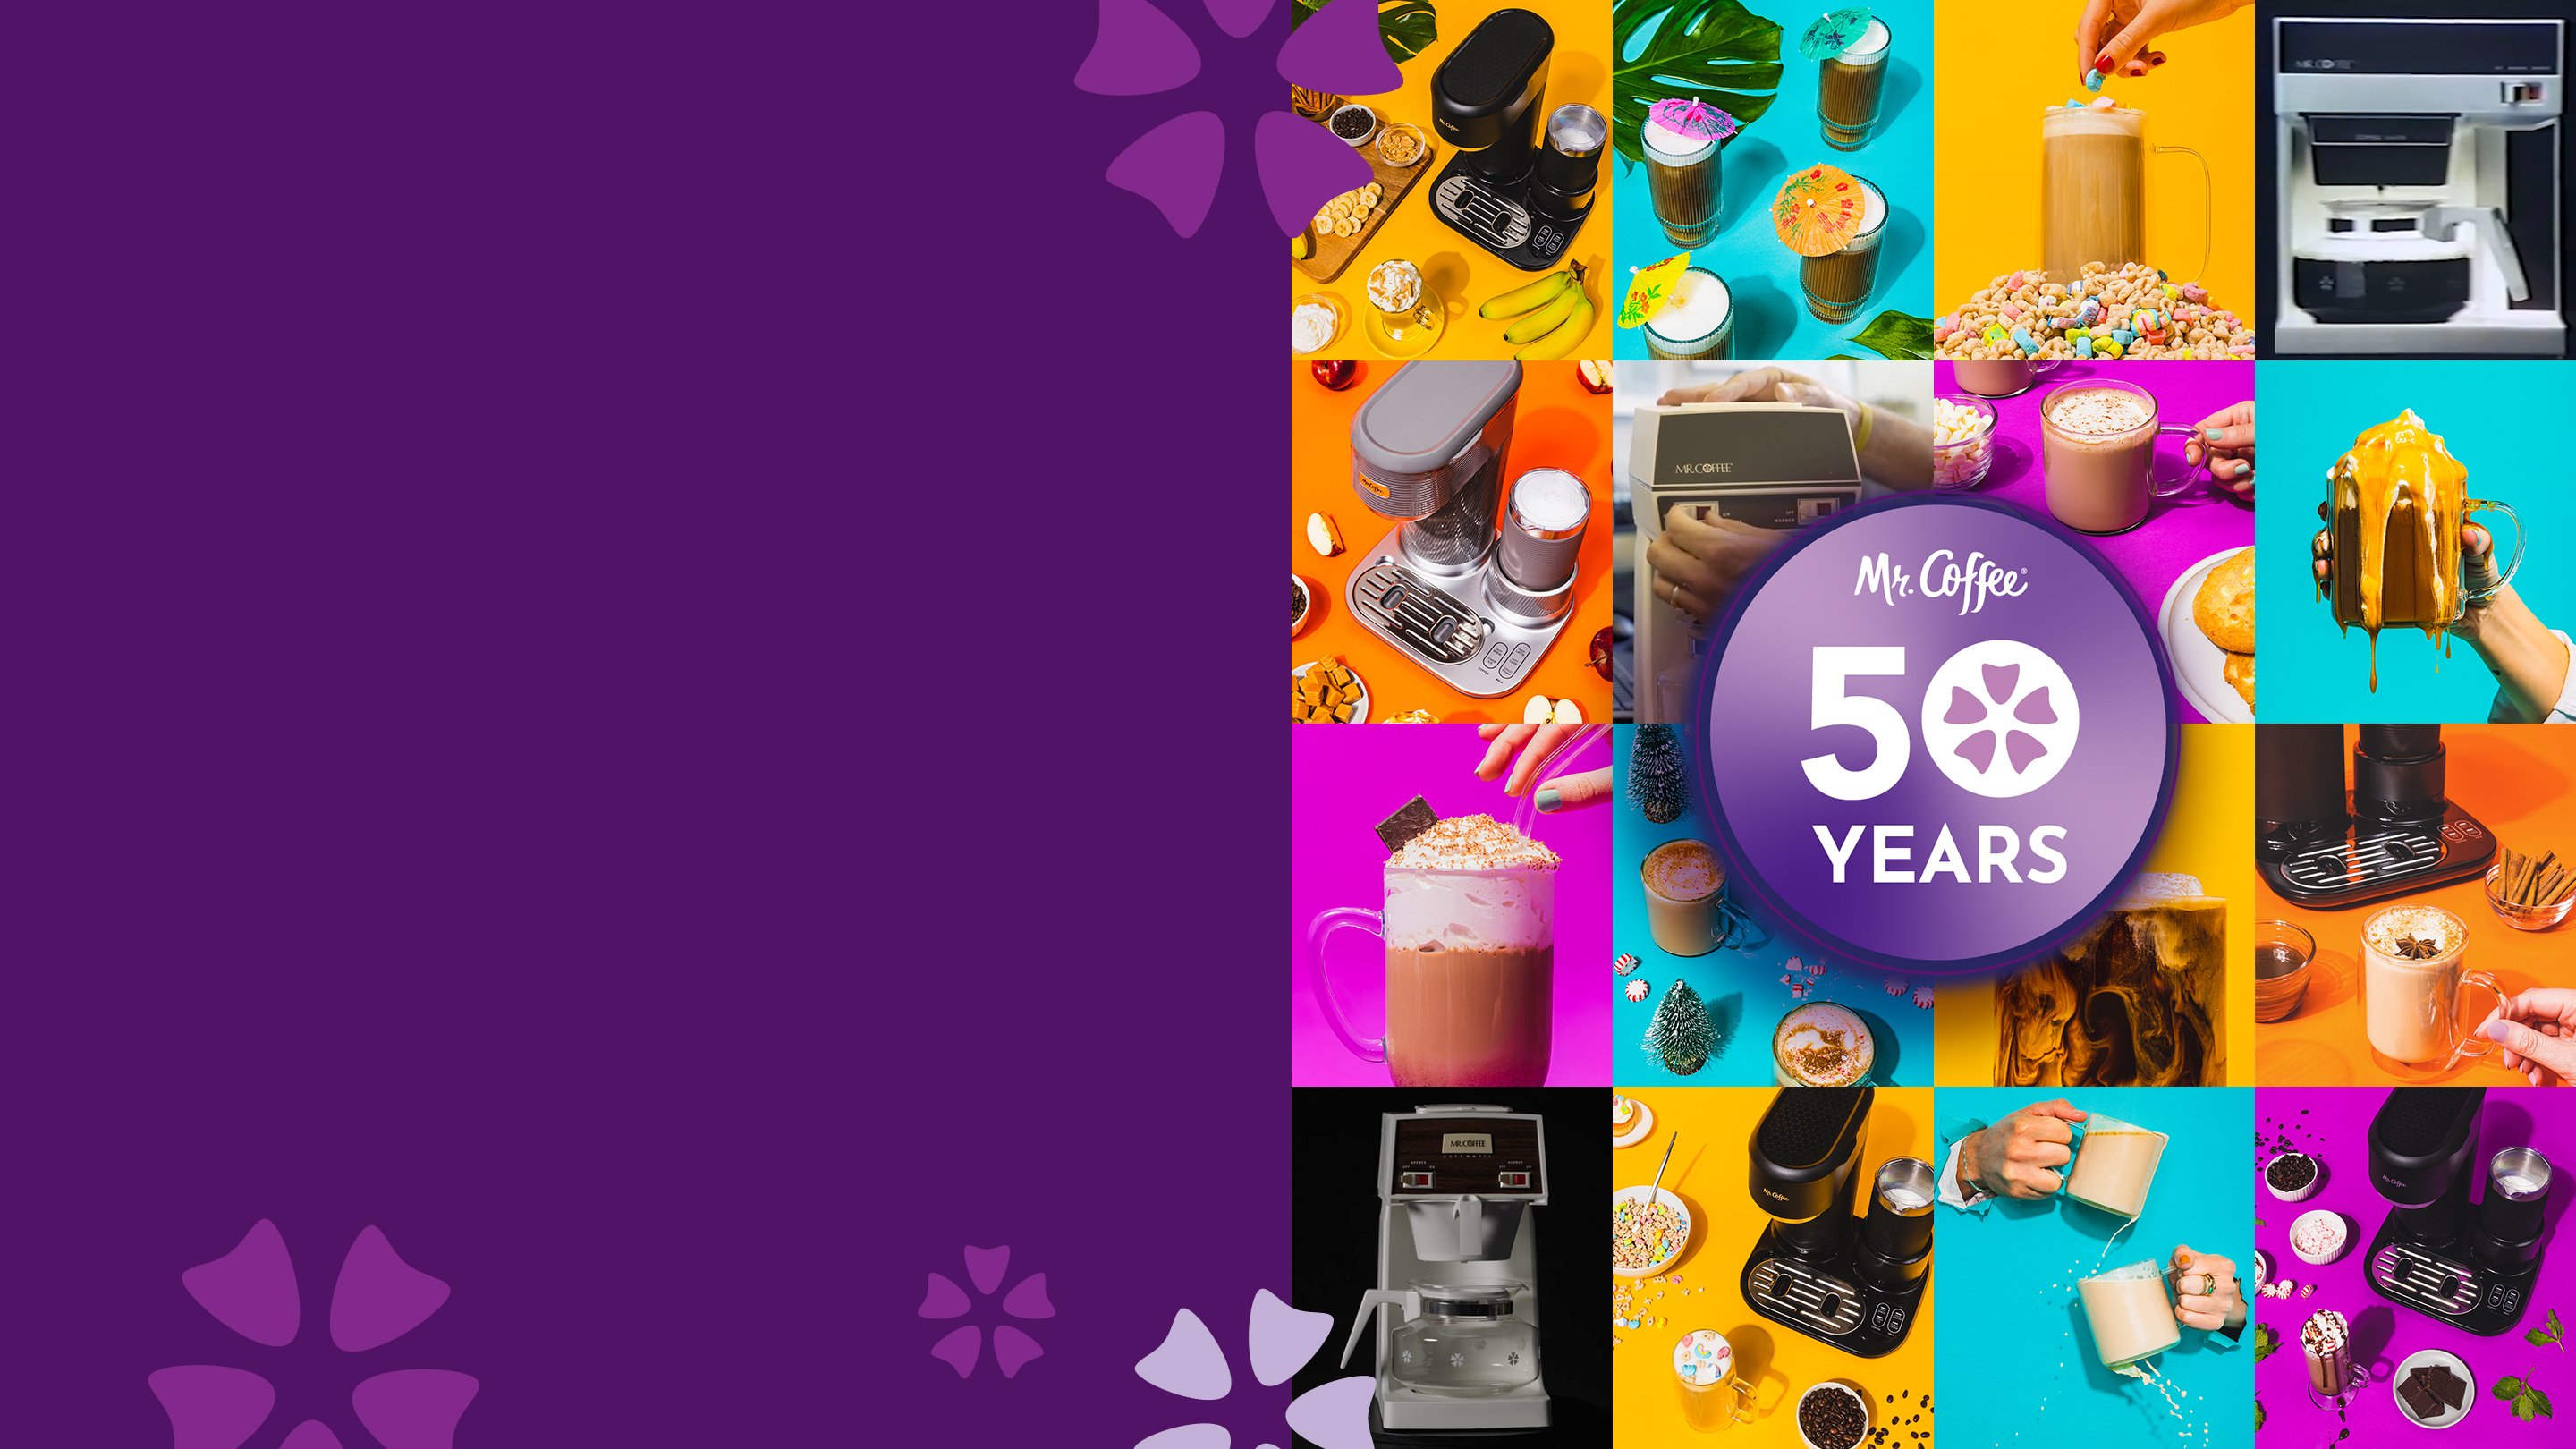 Images of coffee makers for fifty year anniversary